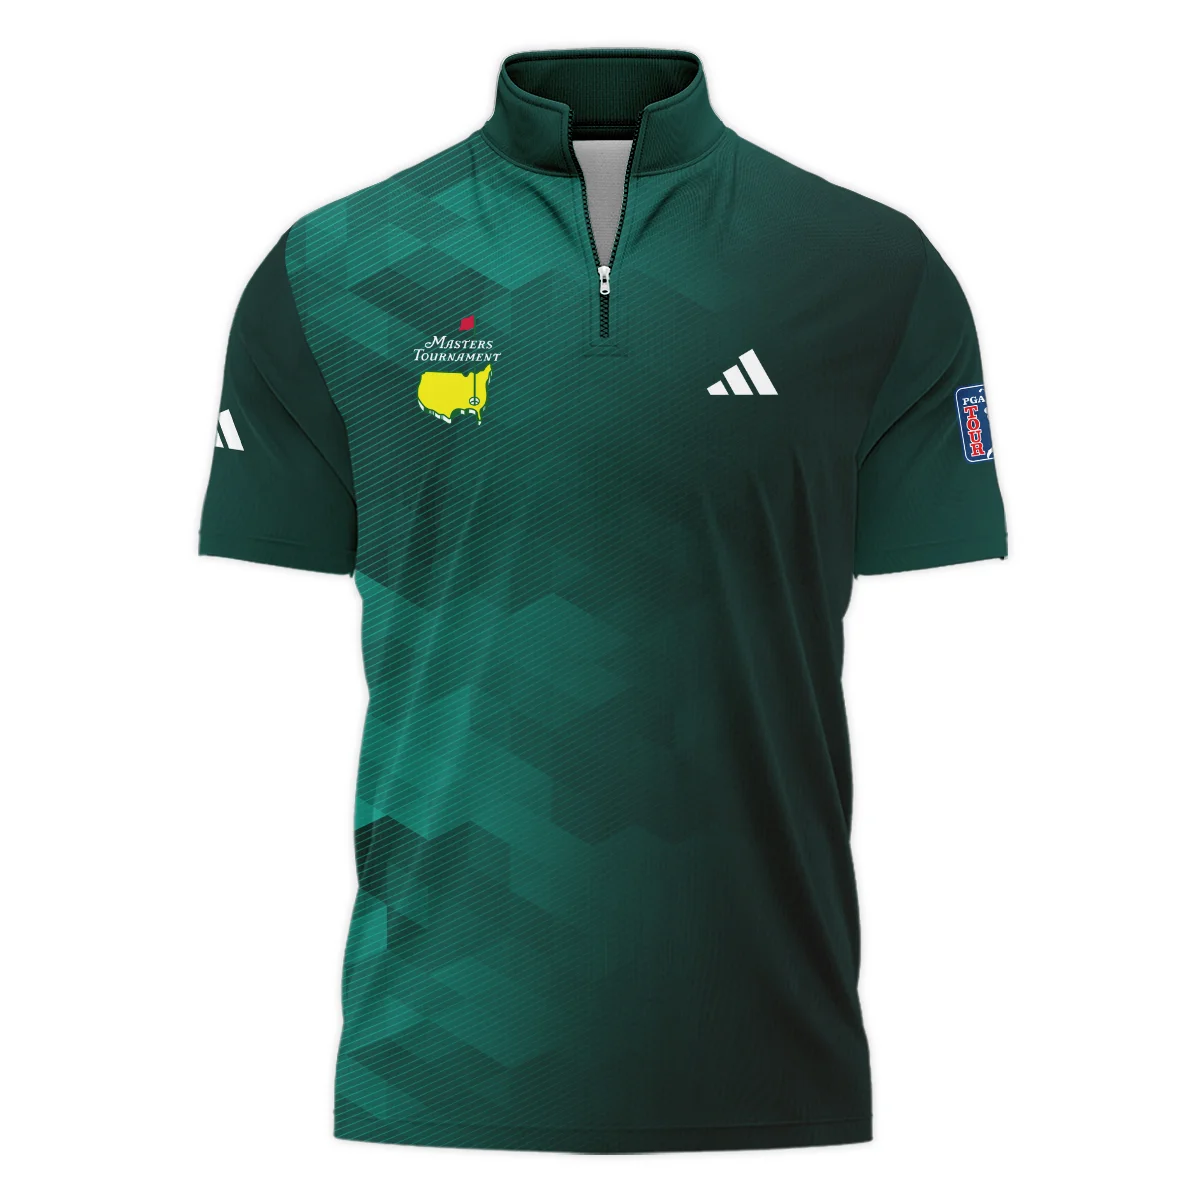 Adidas Golf Sport Dark Green Gradient Abstract Background Masters Tournament Style Classic, Short Sleeve Polo Shirts Quarter-Zip Casual Slim Fit Mock Neck Basic